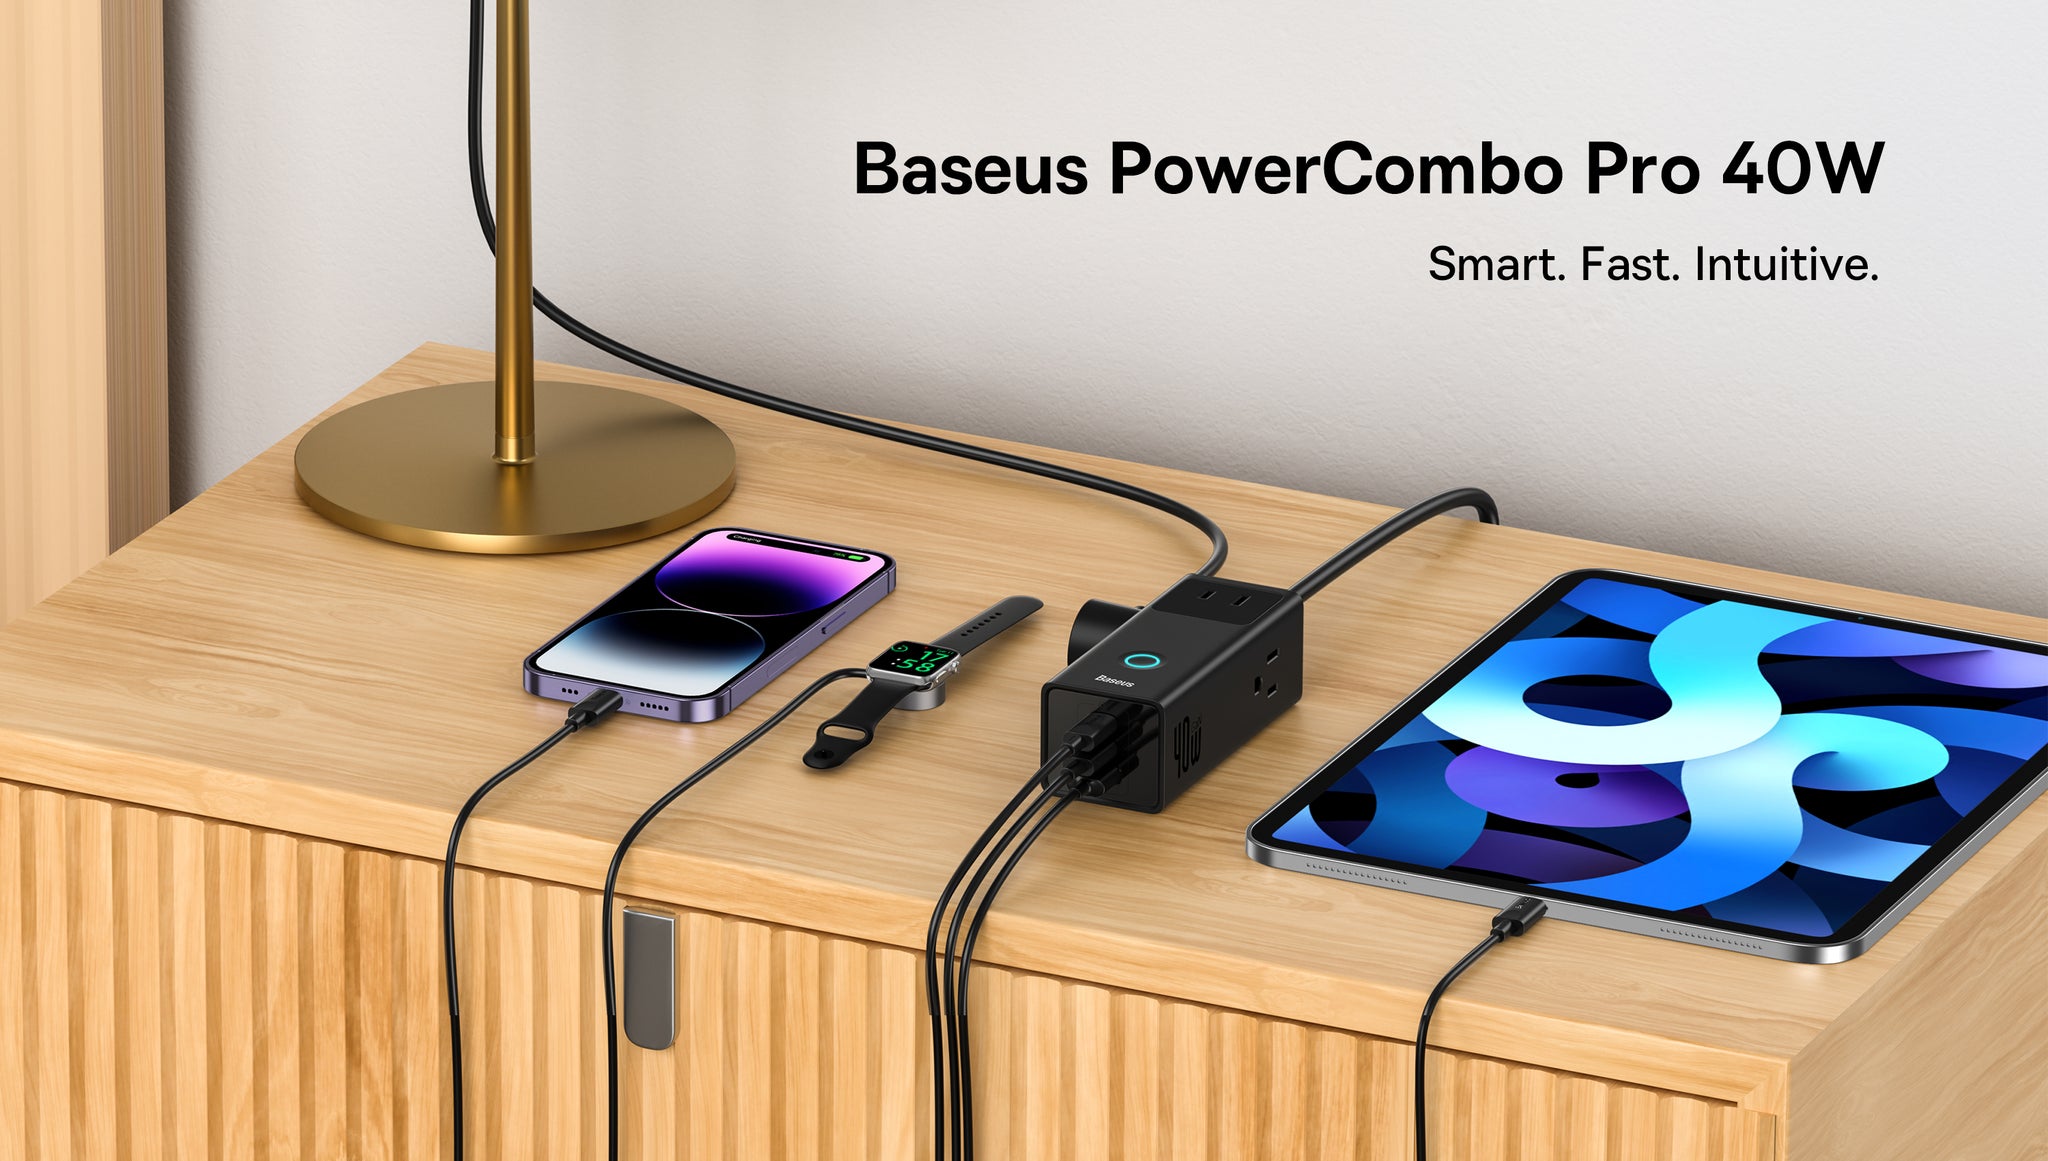 Baseus USB C Charger PowerCombo 65W - 6 in 1 Travel Power Strip USB C Desk  Charging Station with 2AC Outlets, Fast Charging Extension Cord for Laptops